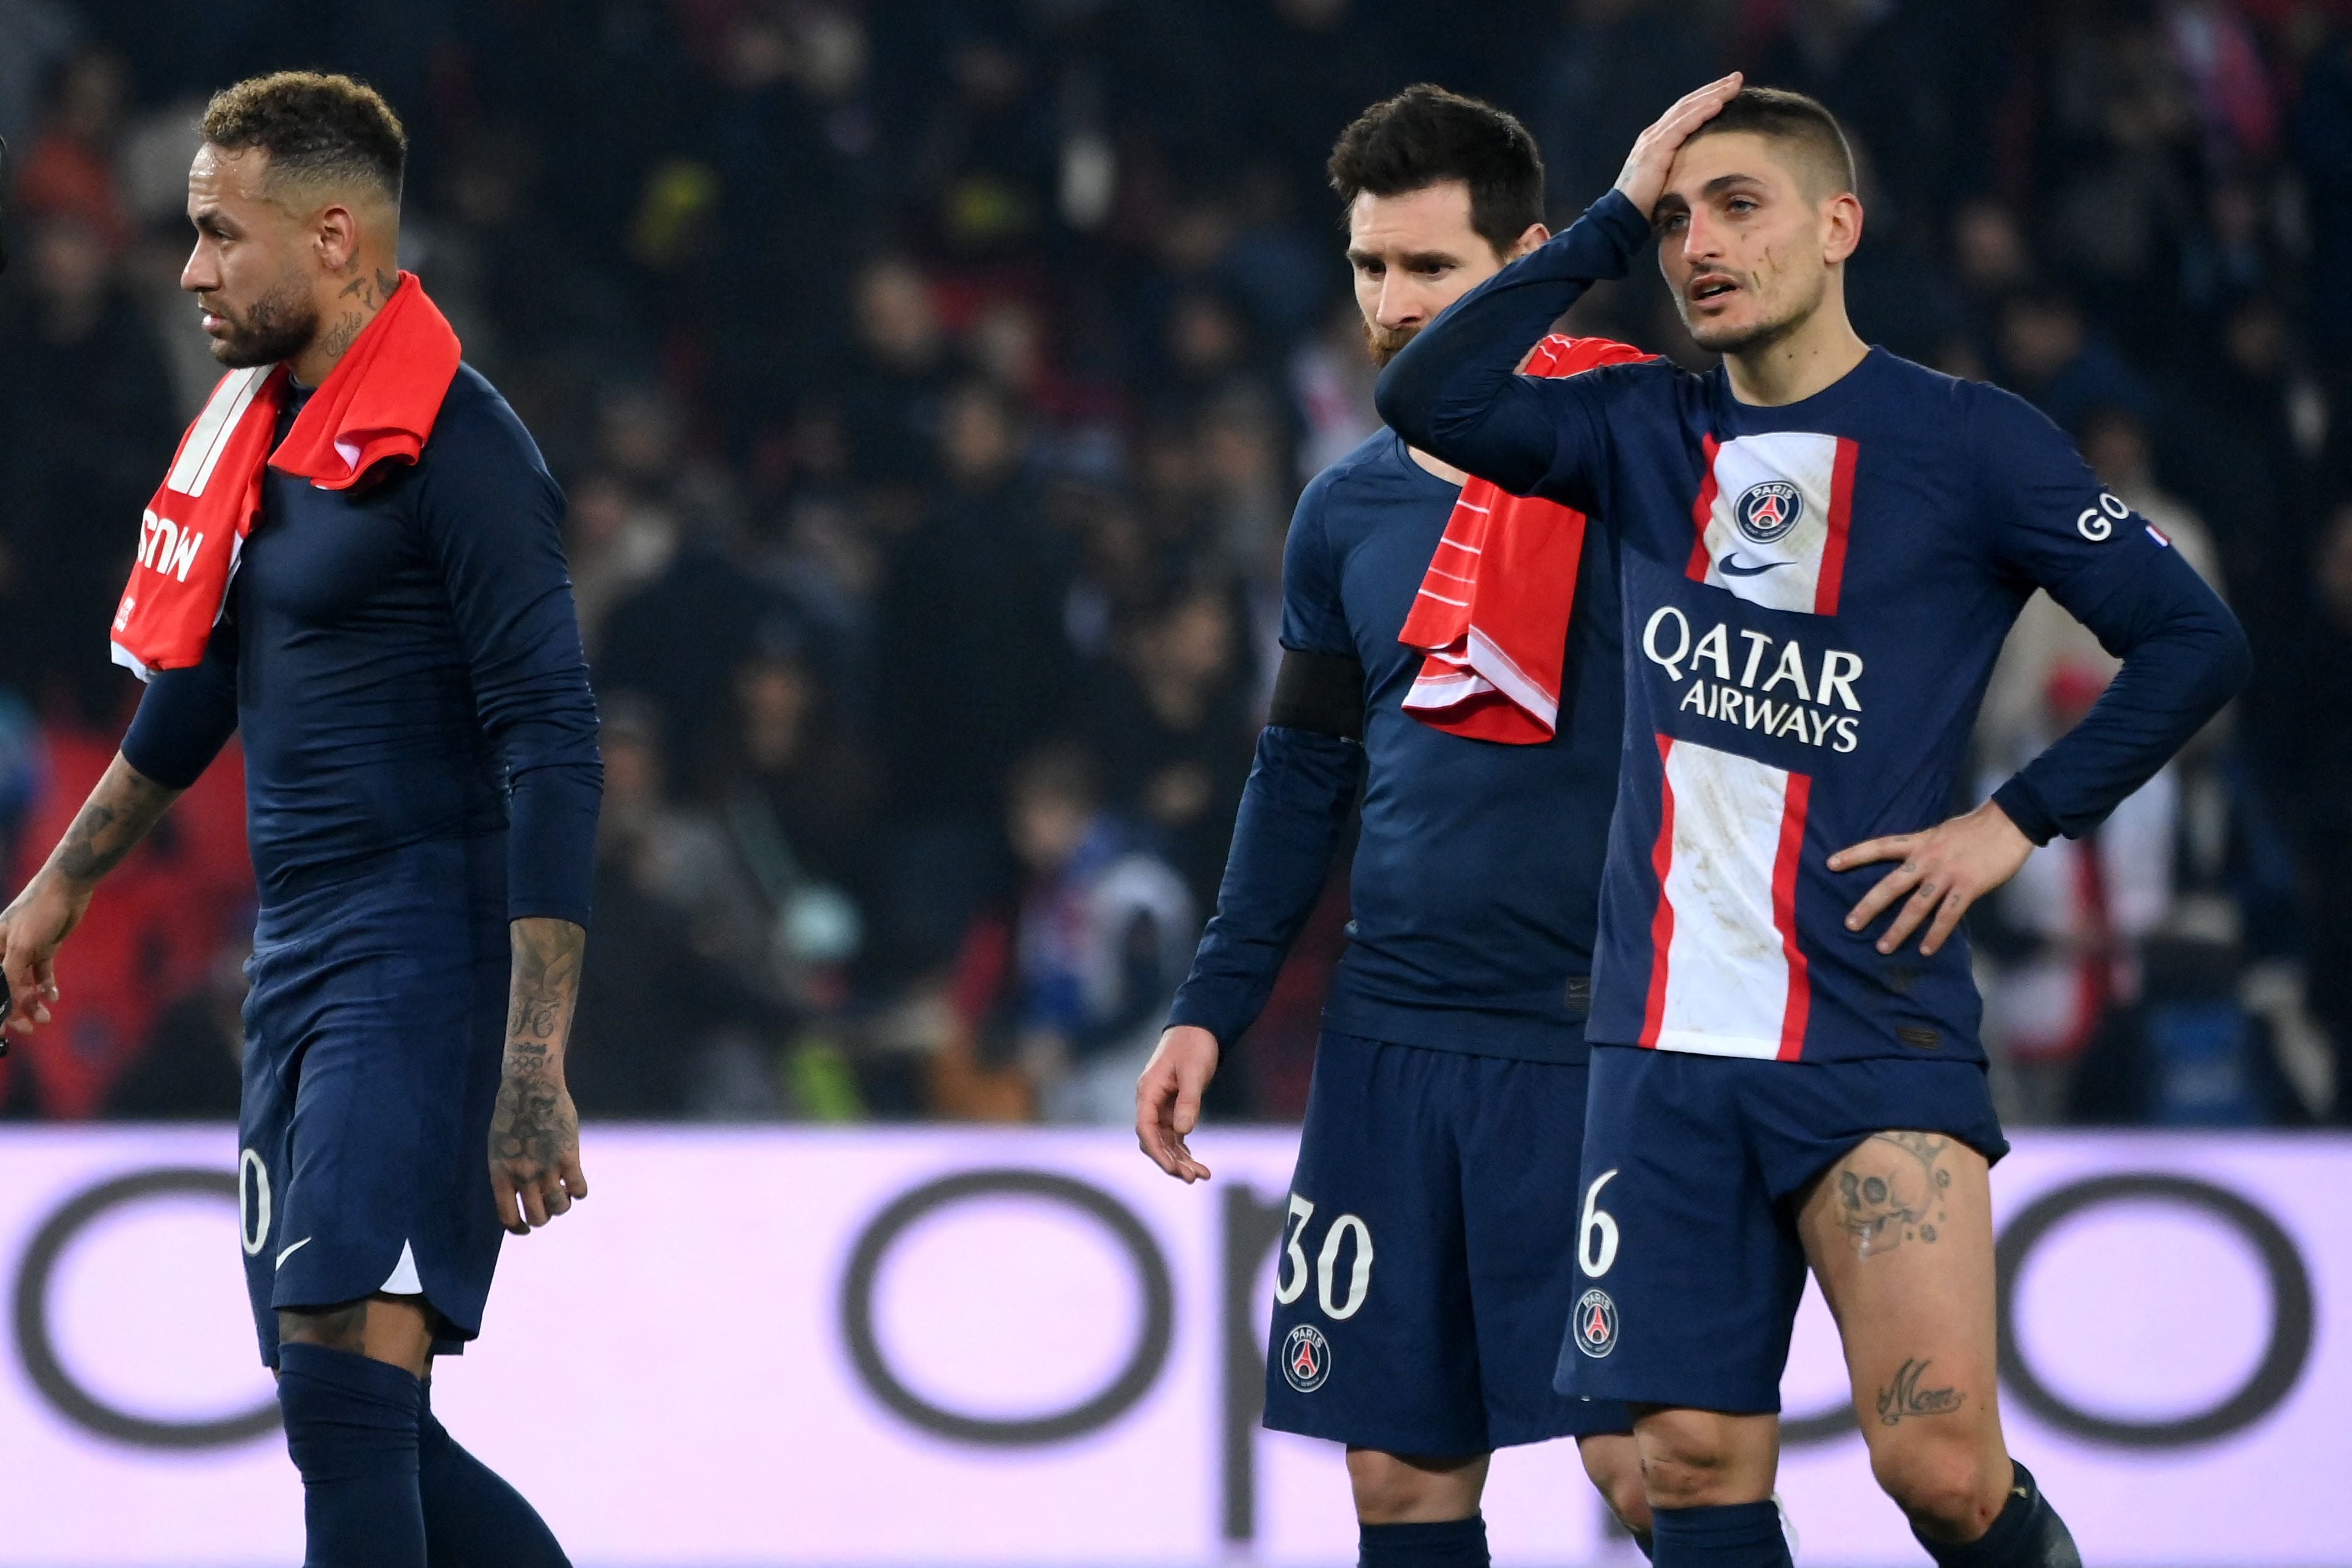 PSG players react at full-time following the defeat